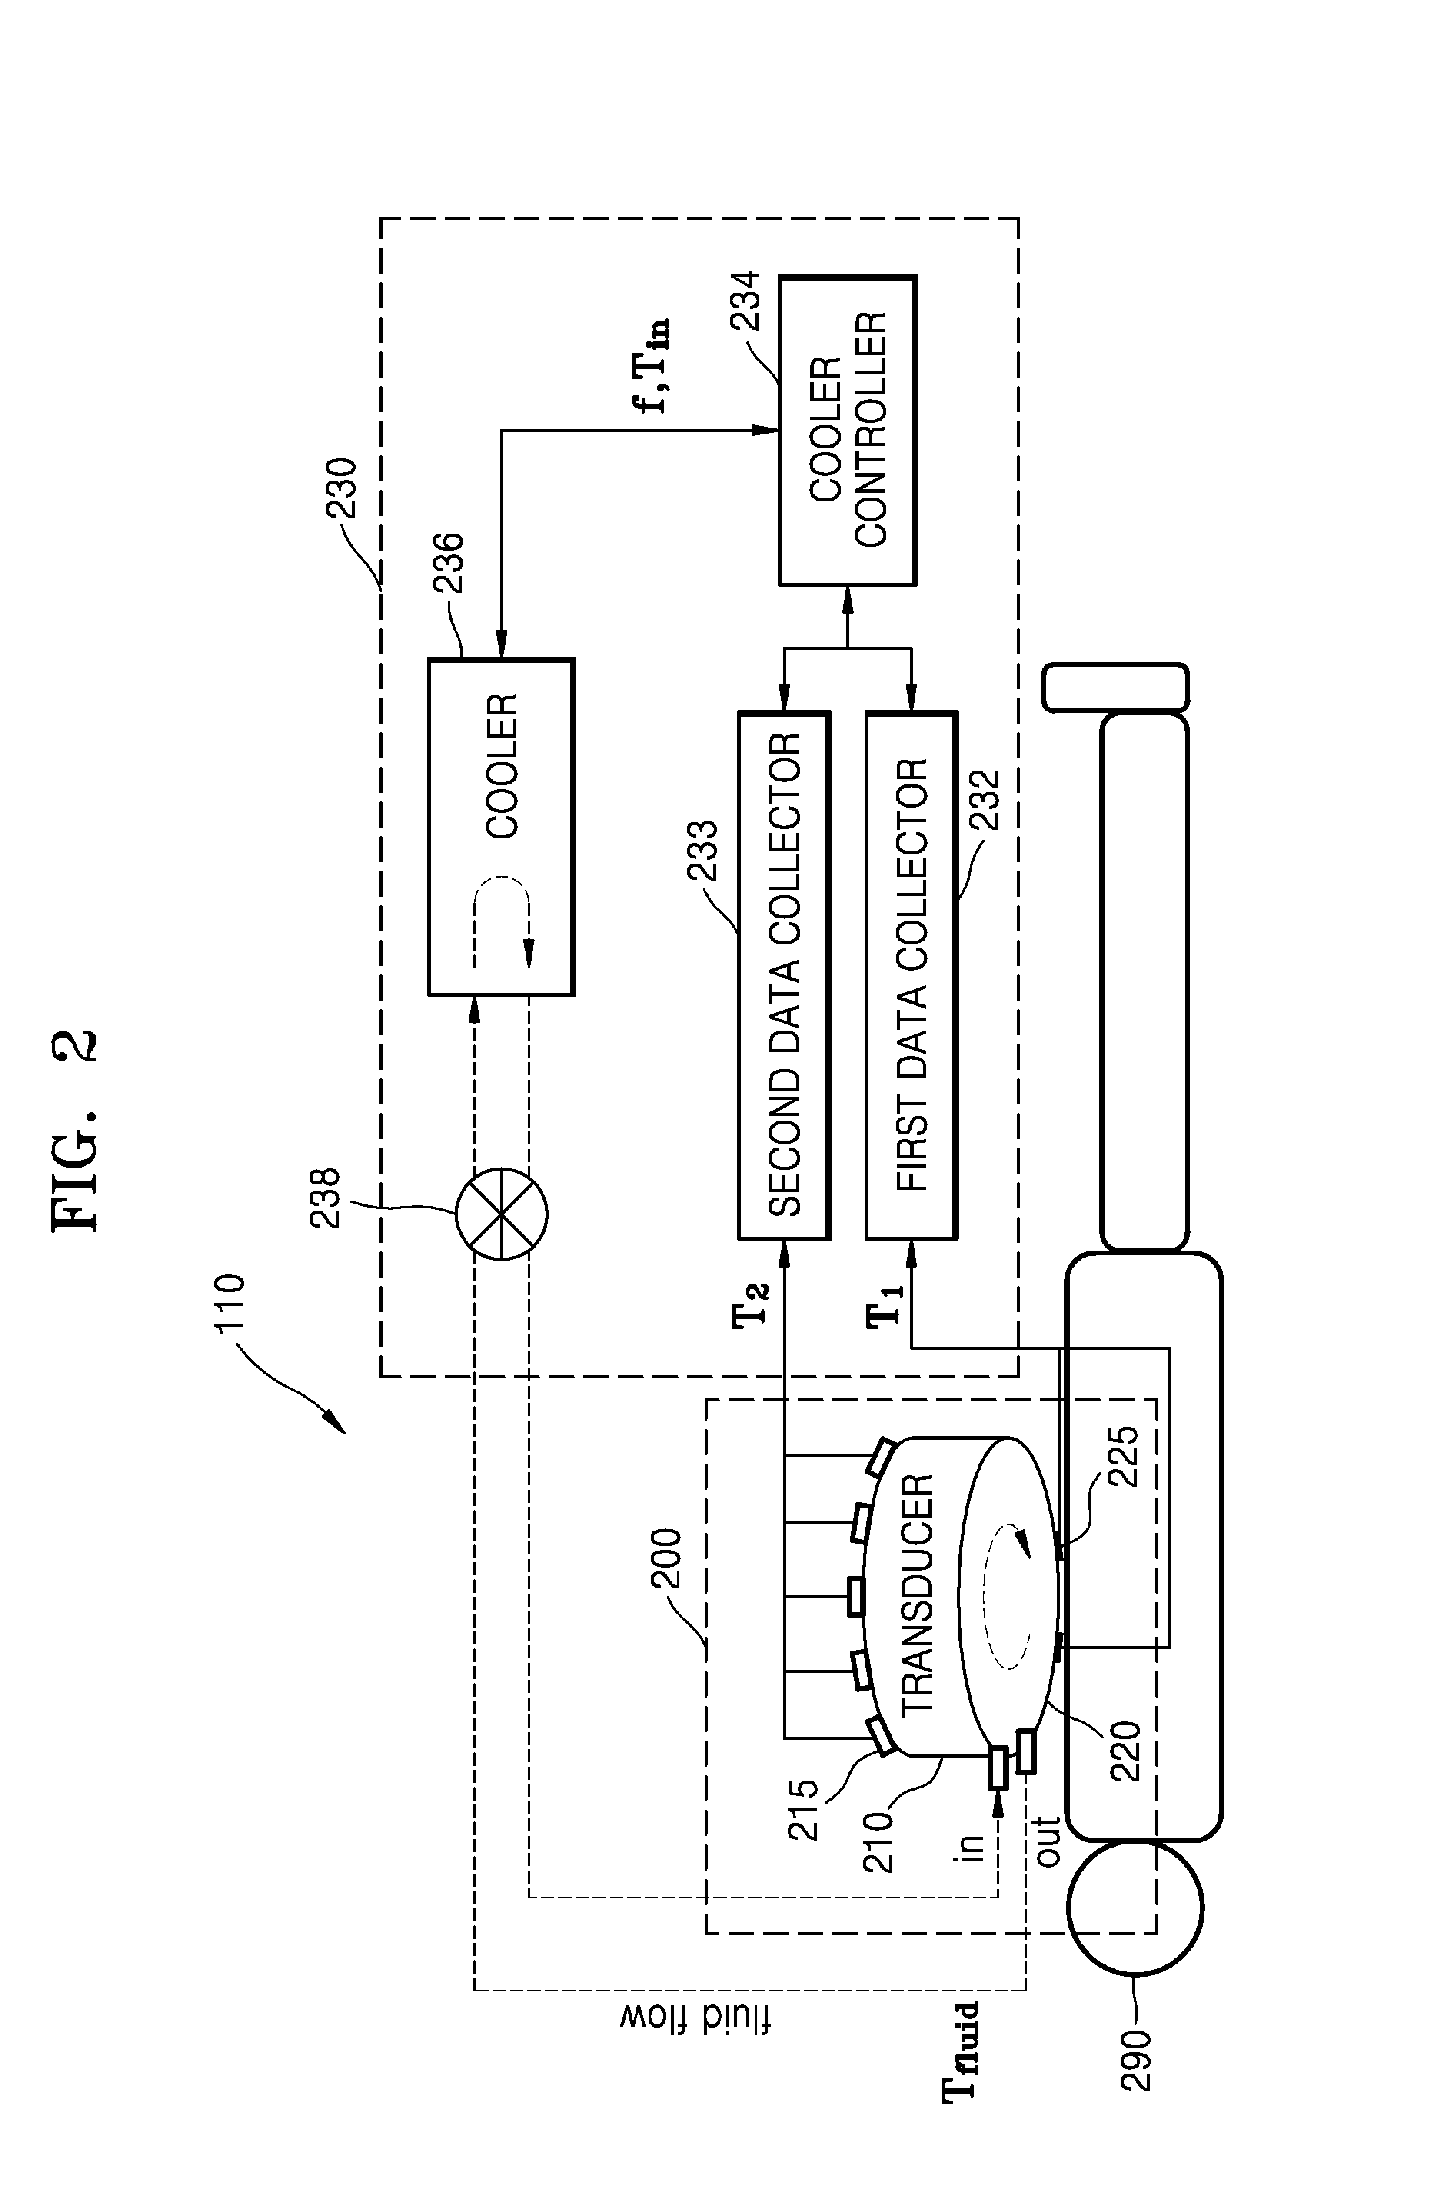 Method of cooling ultrasound treatment apparatus and ultrasound treatment apparatus using the same